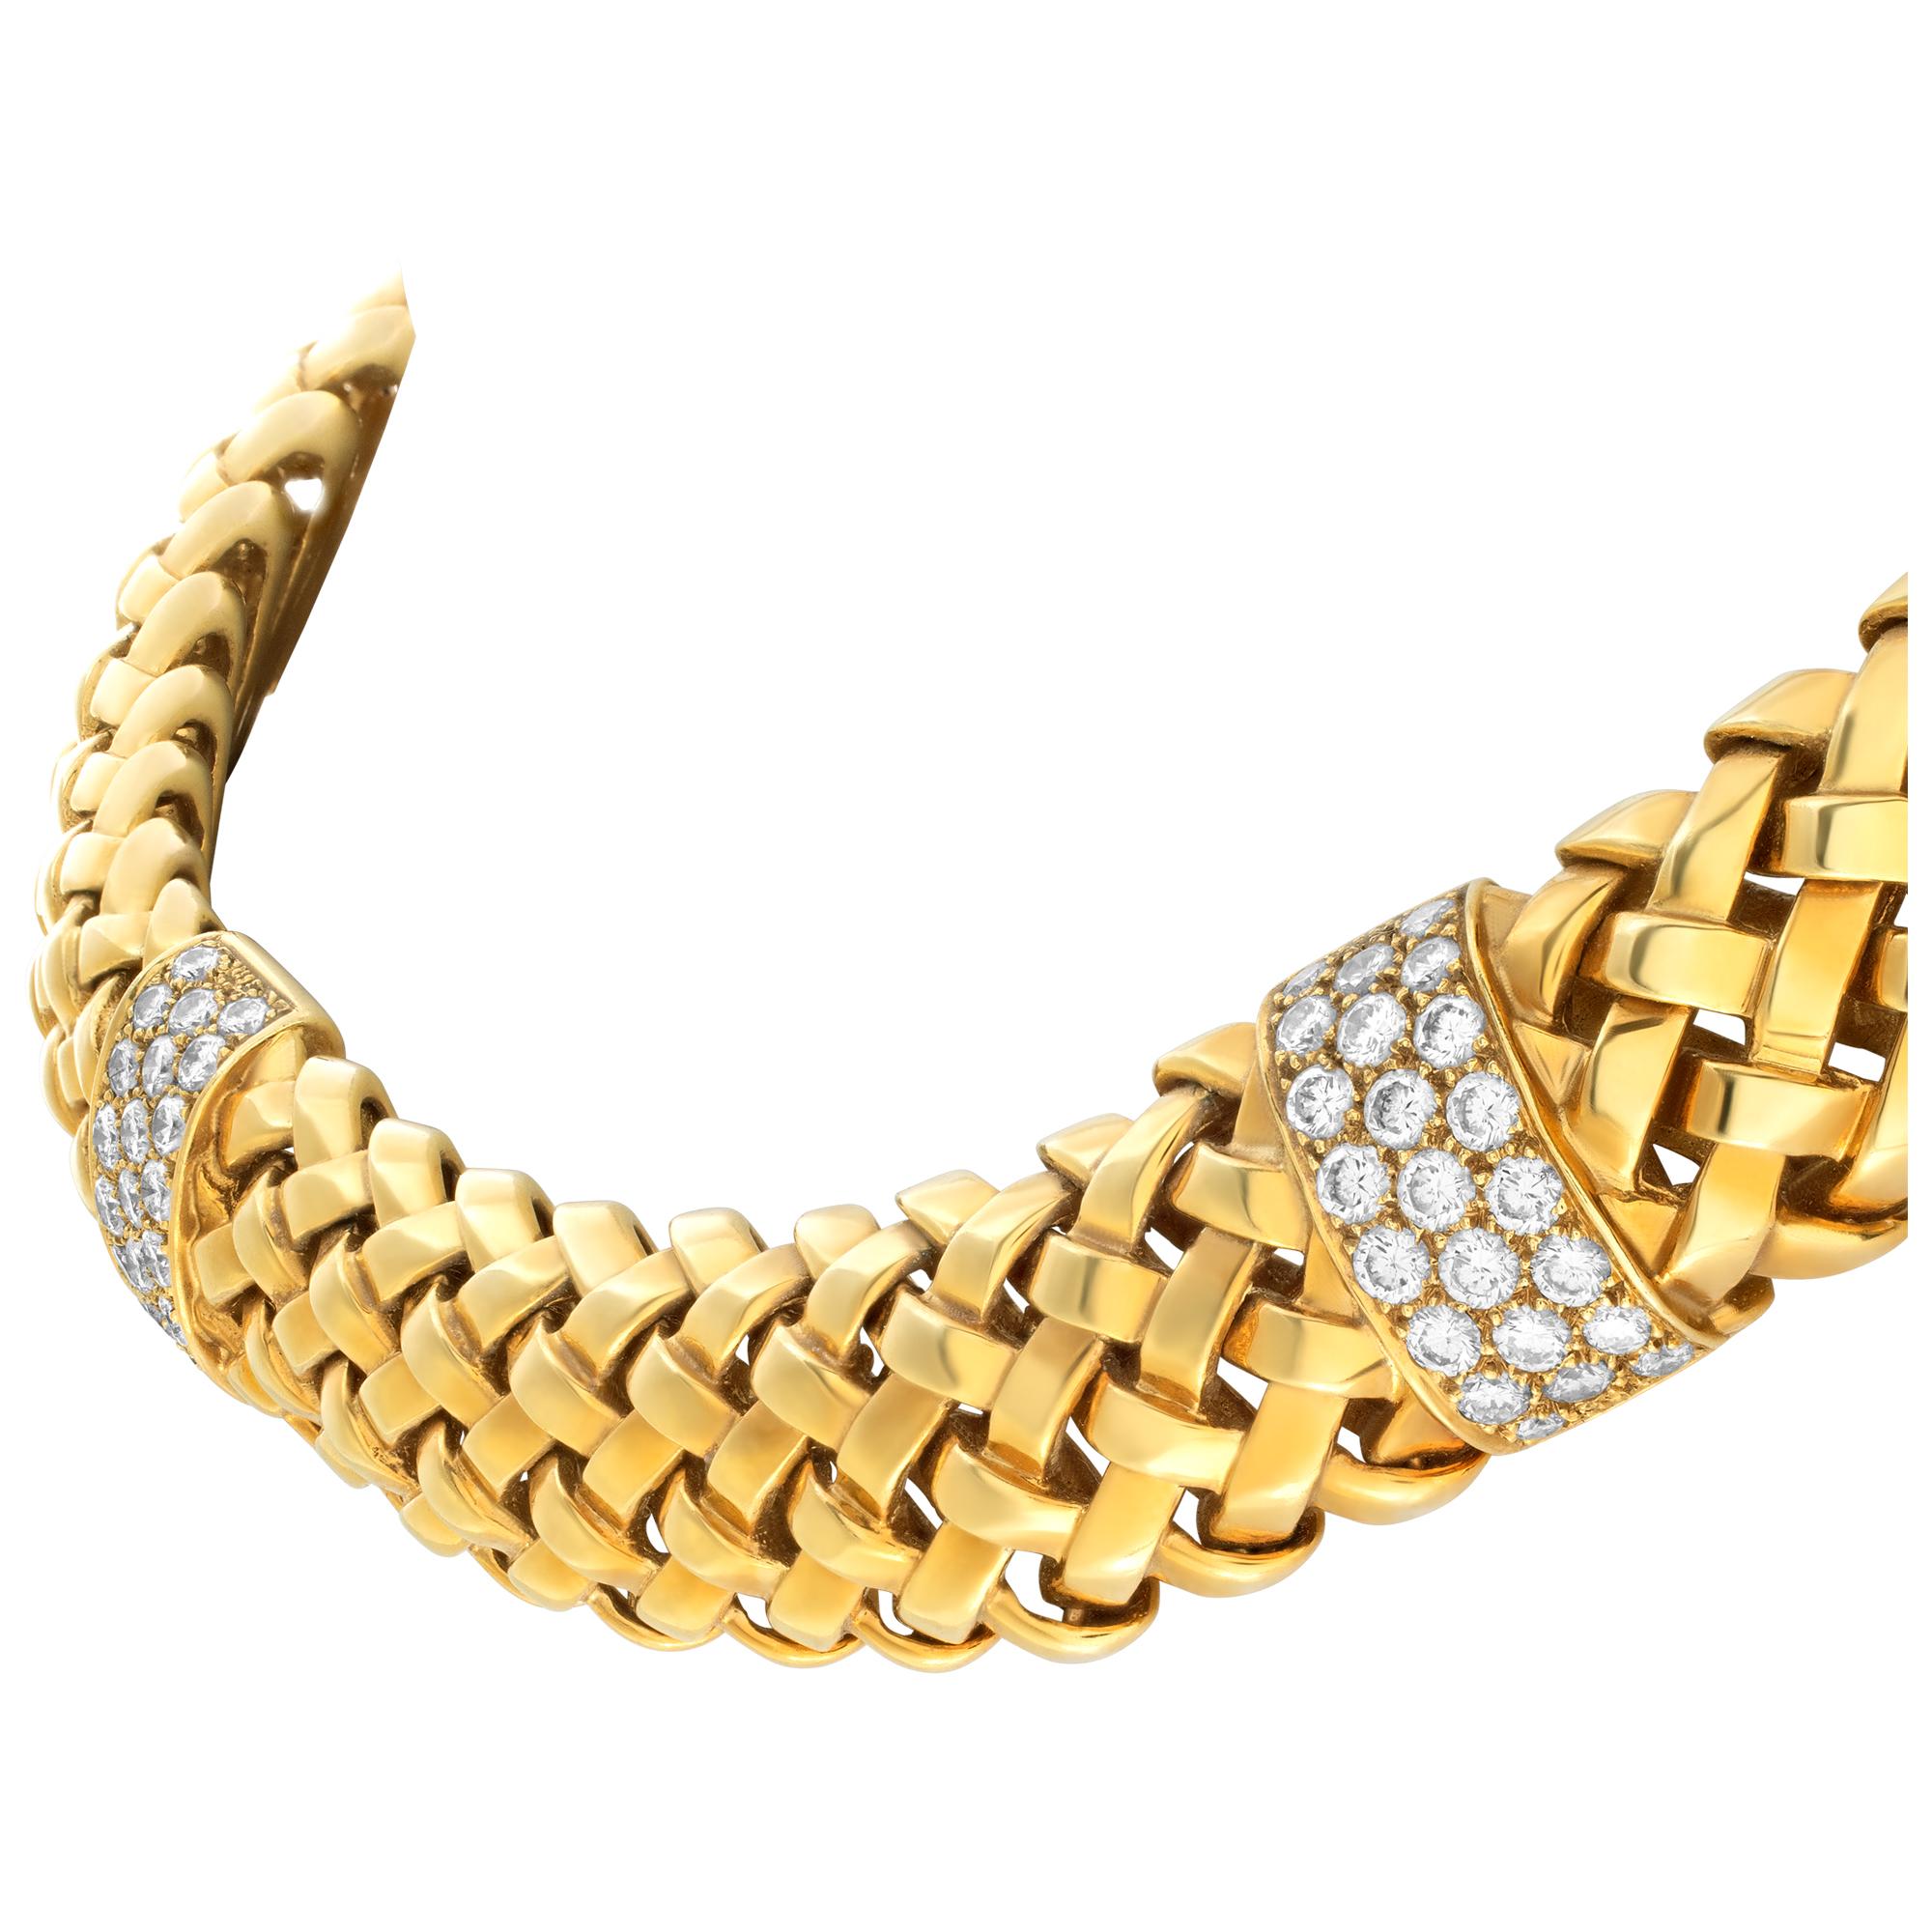 Tiffanny & Co. Vannerie collection necklace in 18K yellow gold. Stunning woven link designed with 2 stations pave set with 38 full cut round brilliant diamonds totalling approximately 1.85 cts in F color, VS clarity diamonds. Length is 19